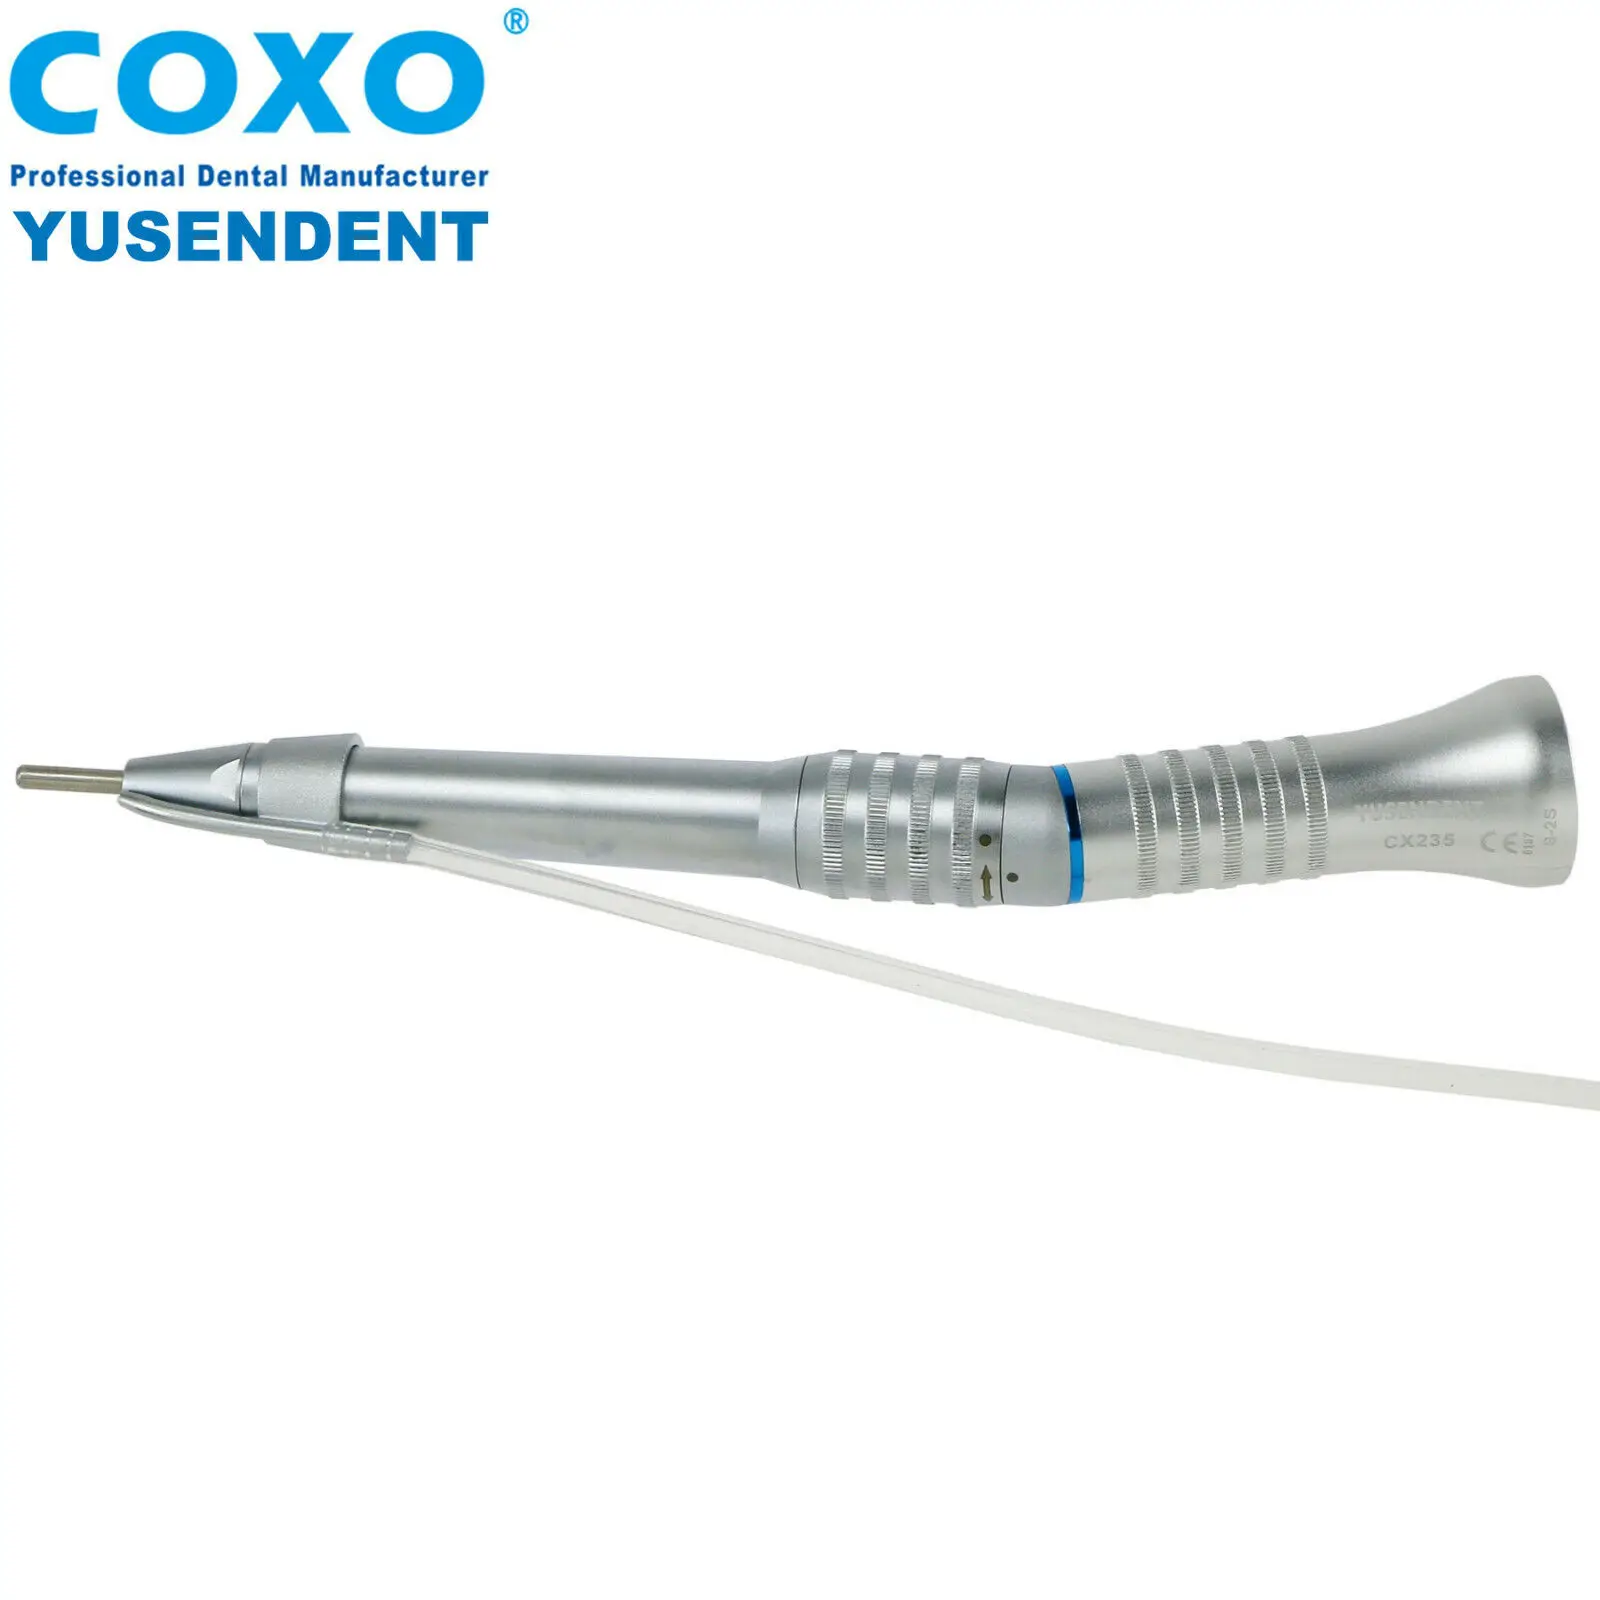 YUSENDENT COXO Dental Surgical Operation 20º Straight Head 1:1 2S enlarge